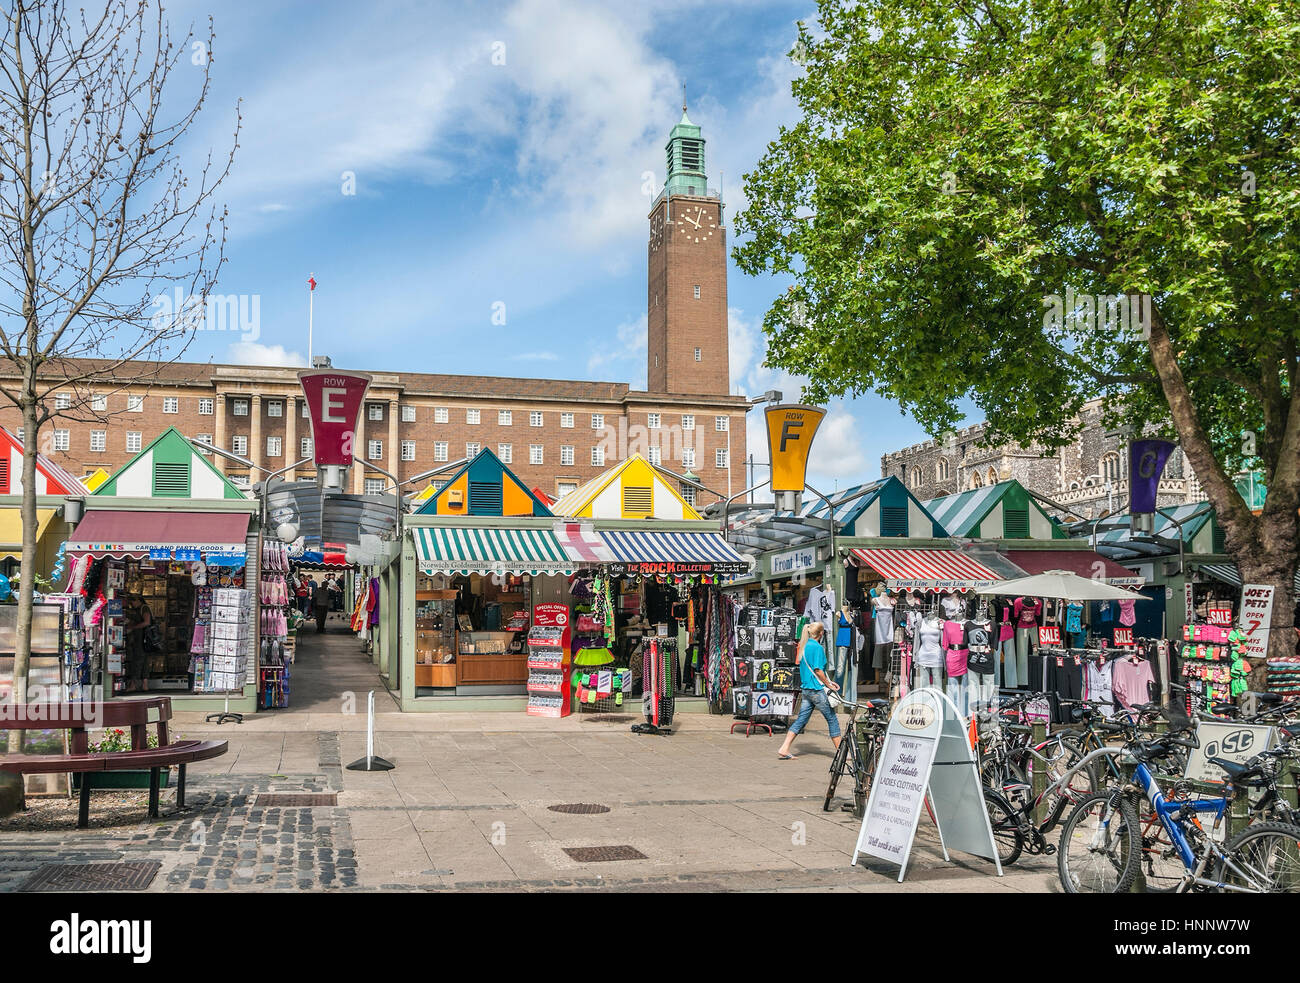 Market stalls at the Market Square of Norwich with the City Hall in the background, Norfolk, England, UK. Stock Photo